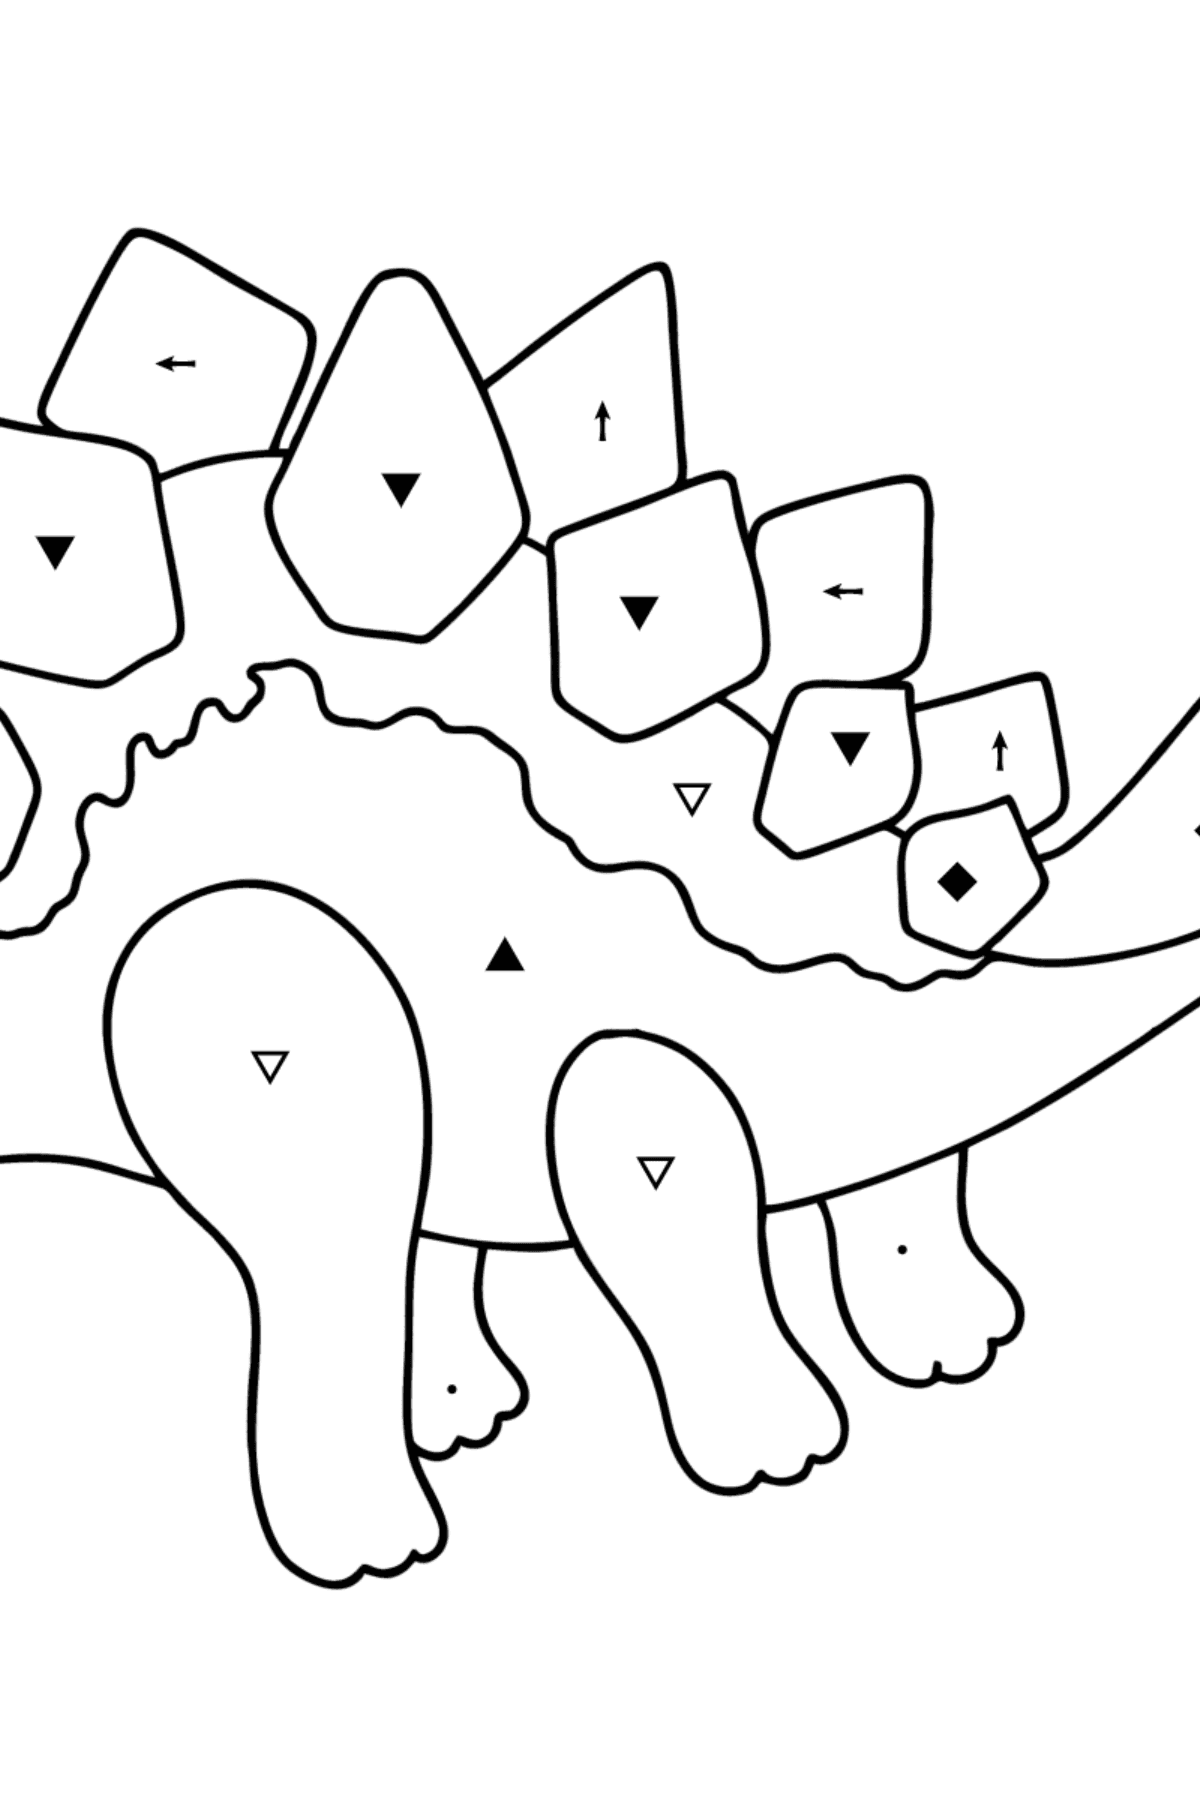 Stegosaurus coloring page - Coloring by Symbols for Kids